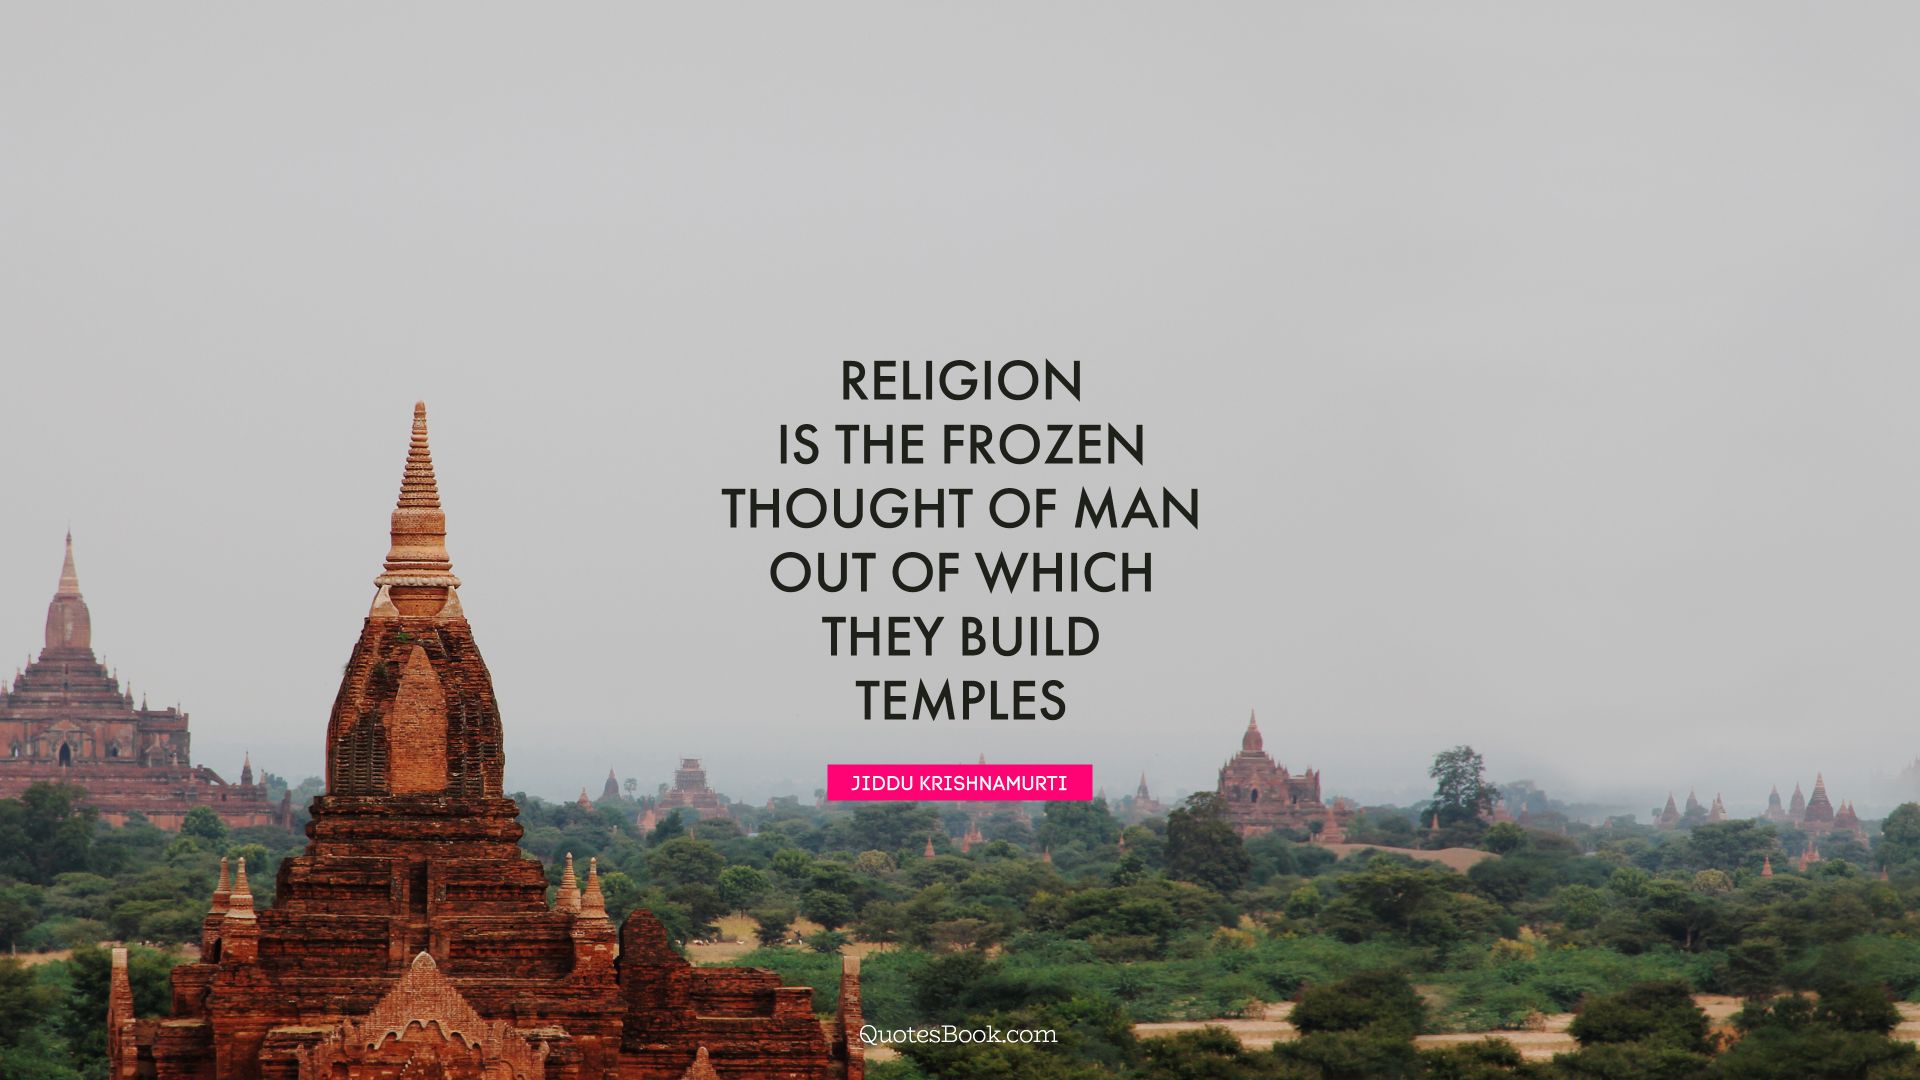 Religion is the frozen thought of man out of which they build temples. - Quote by Jiddu Krishnamurti